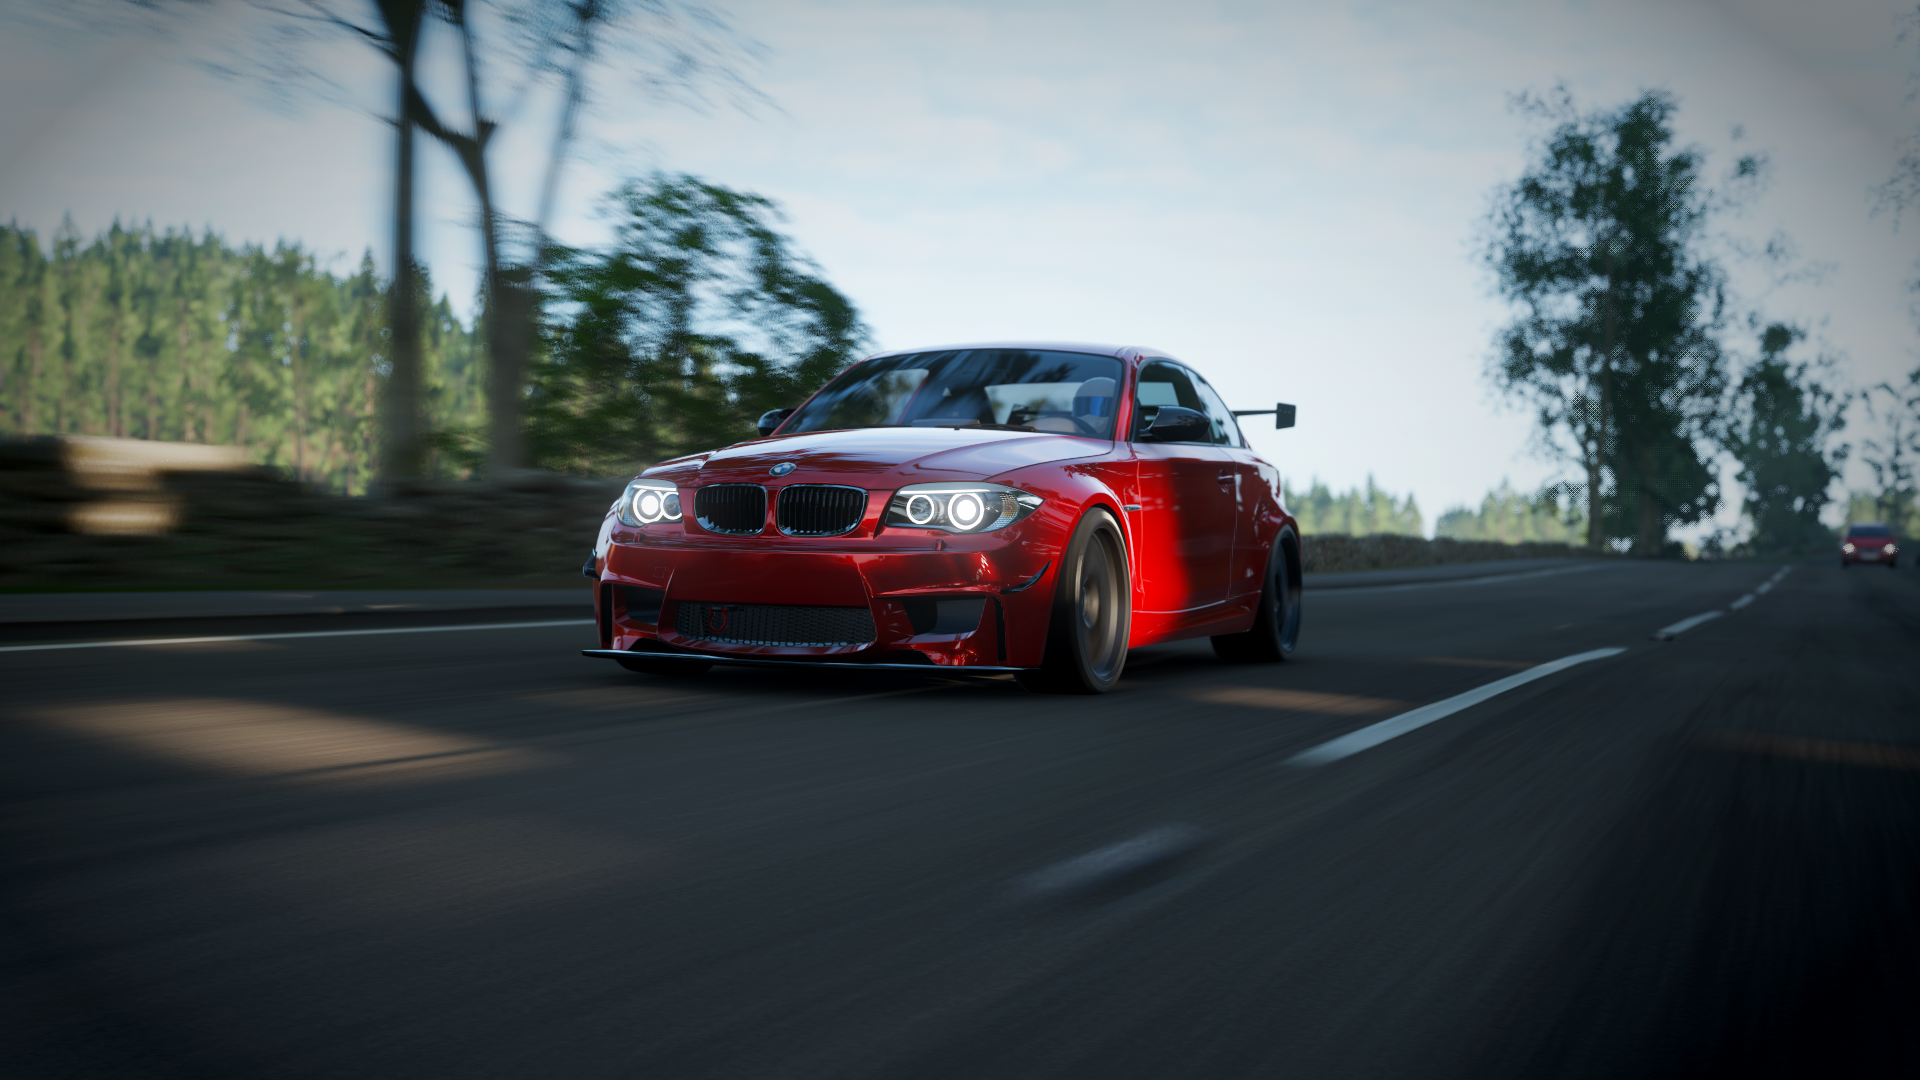 General 1920x1080 BMW Forza Horizon 4 frontal view BMW 1 series car video games vehicle red cars